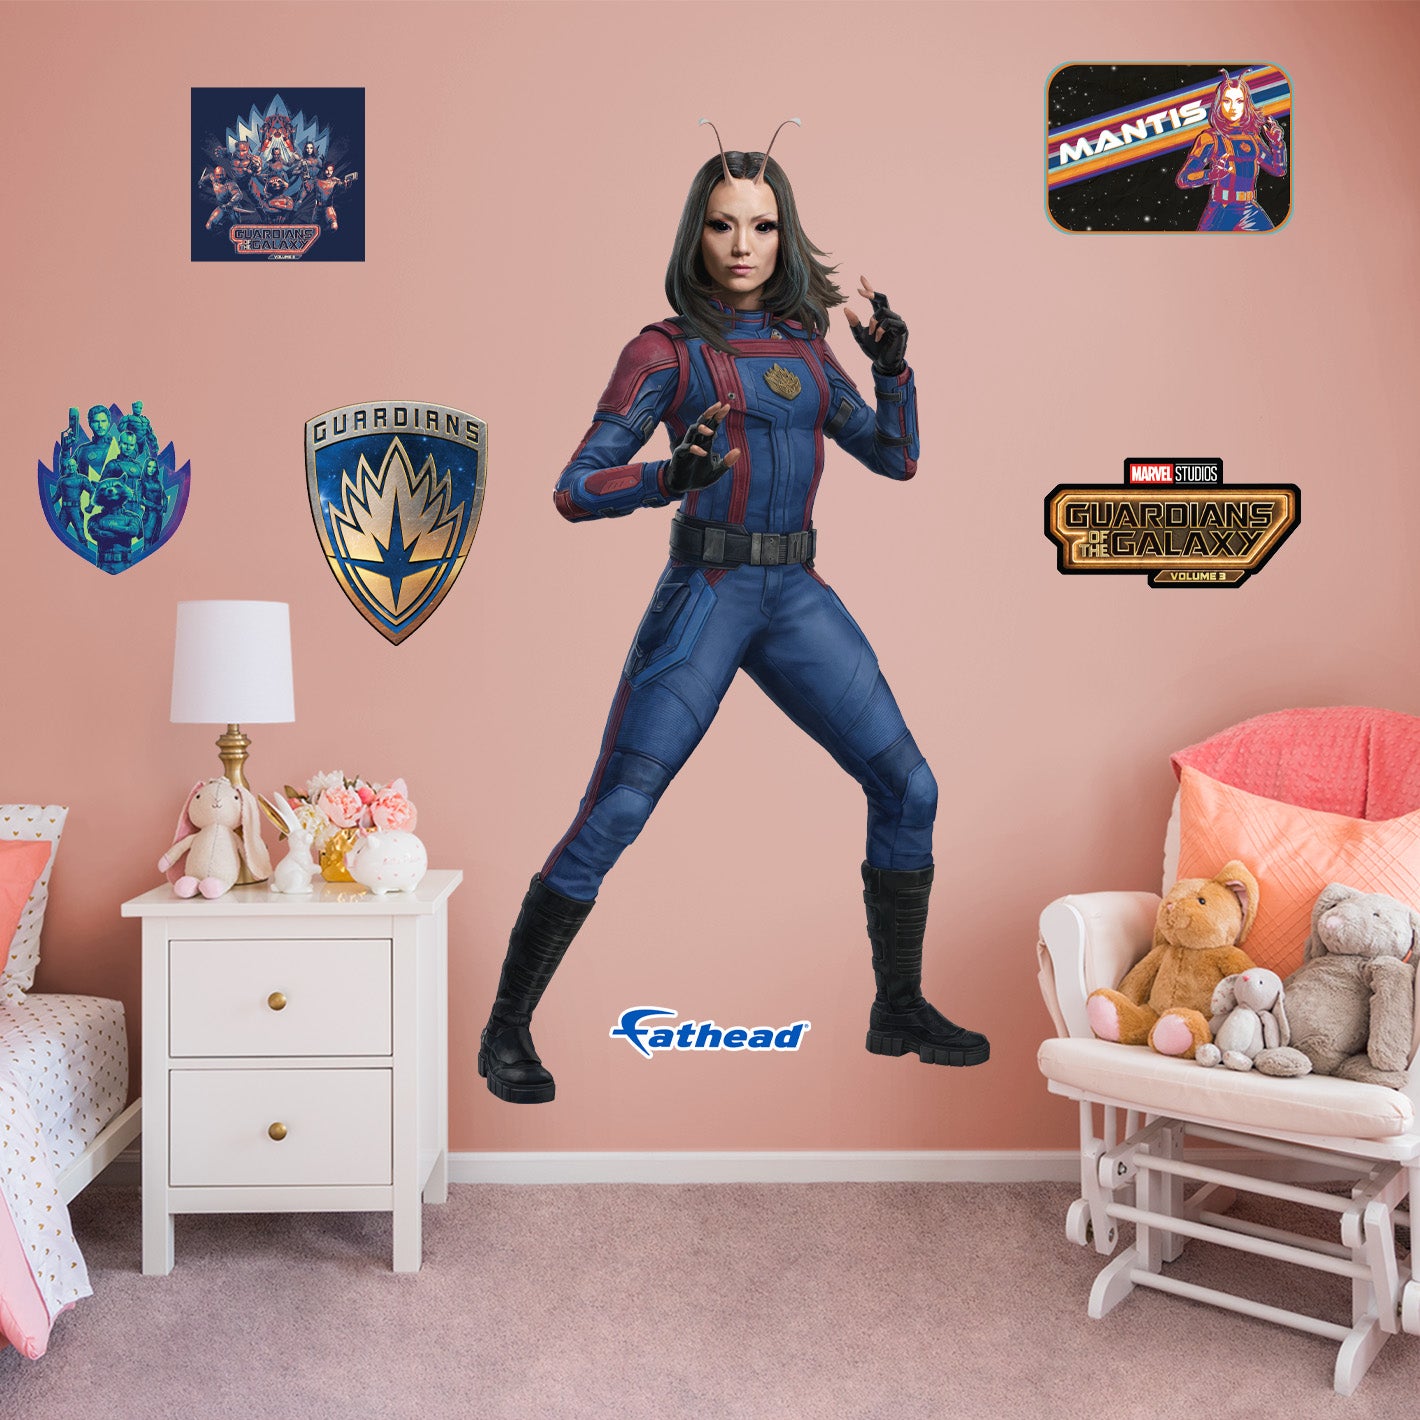 Guardians of the Galaxy vol.3: Mantis RealBig - Officially Licensed Marvel Removable Adhesive Decal